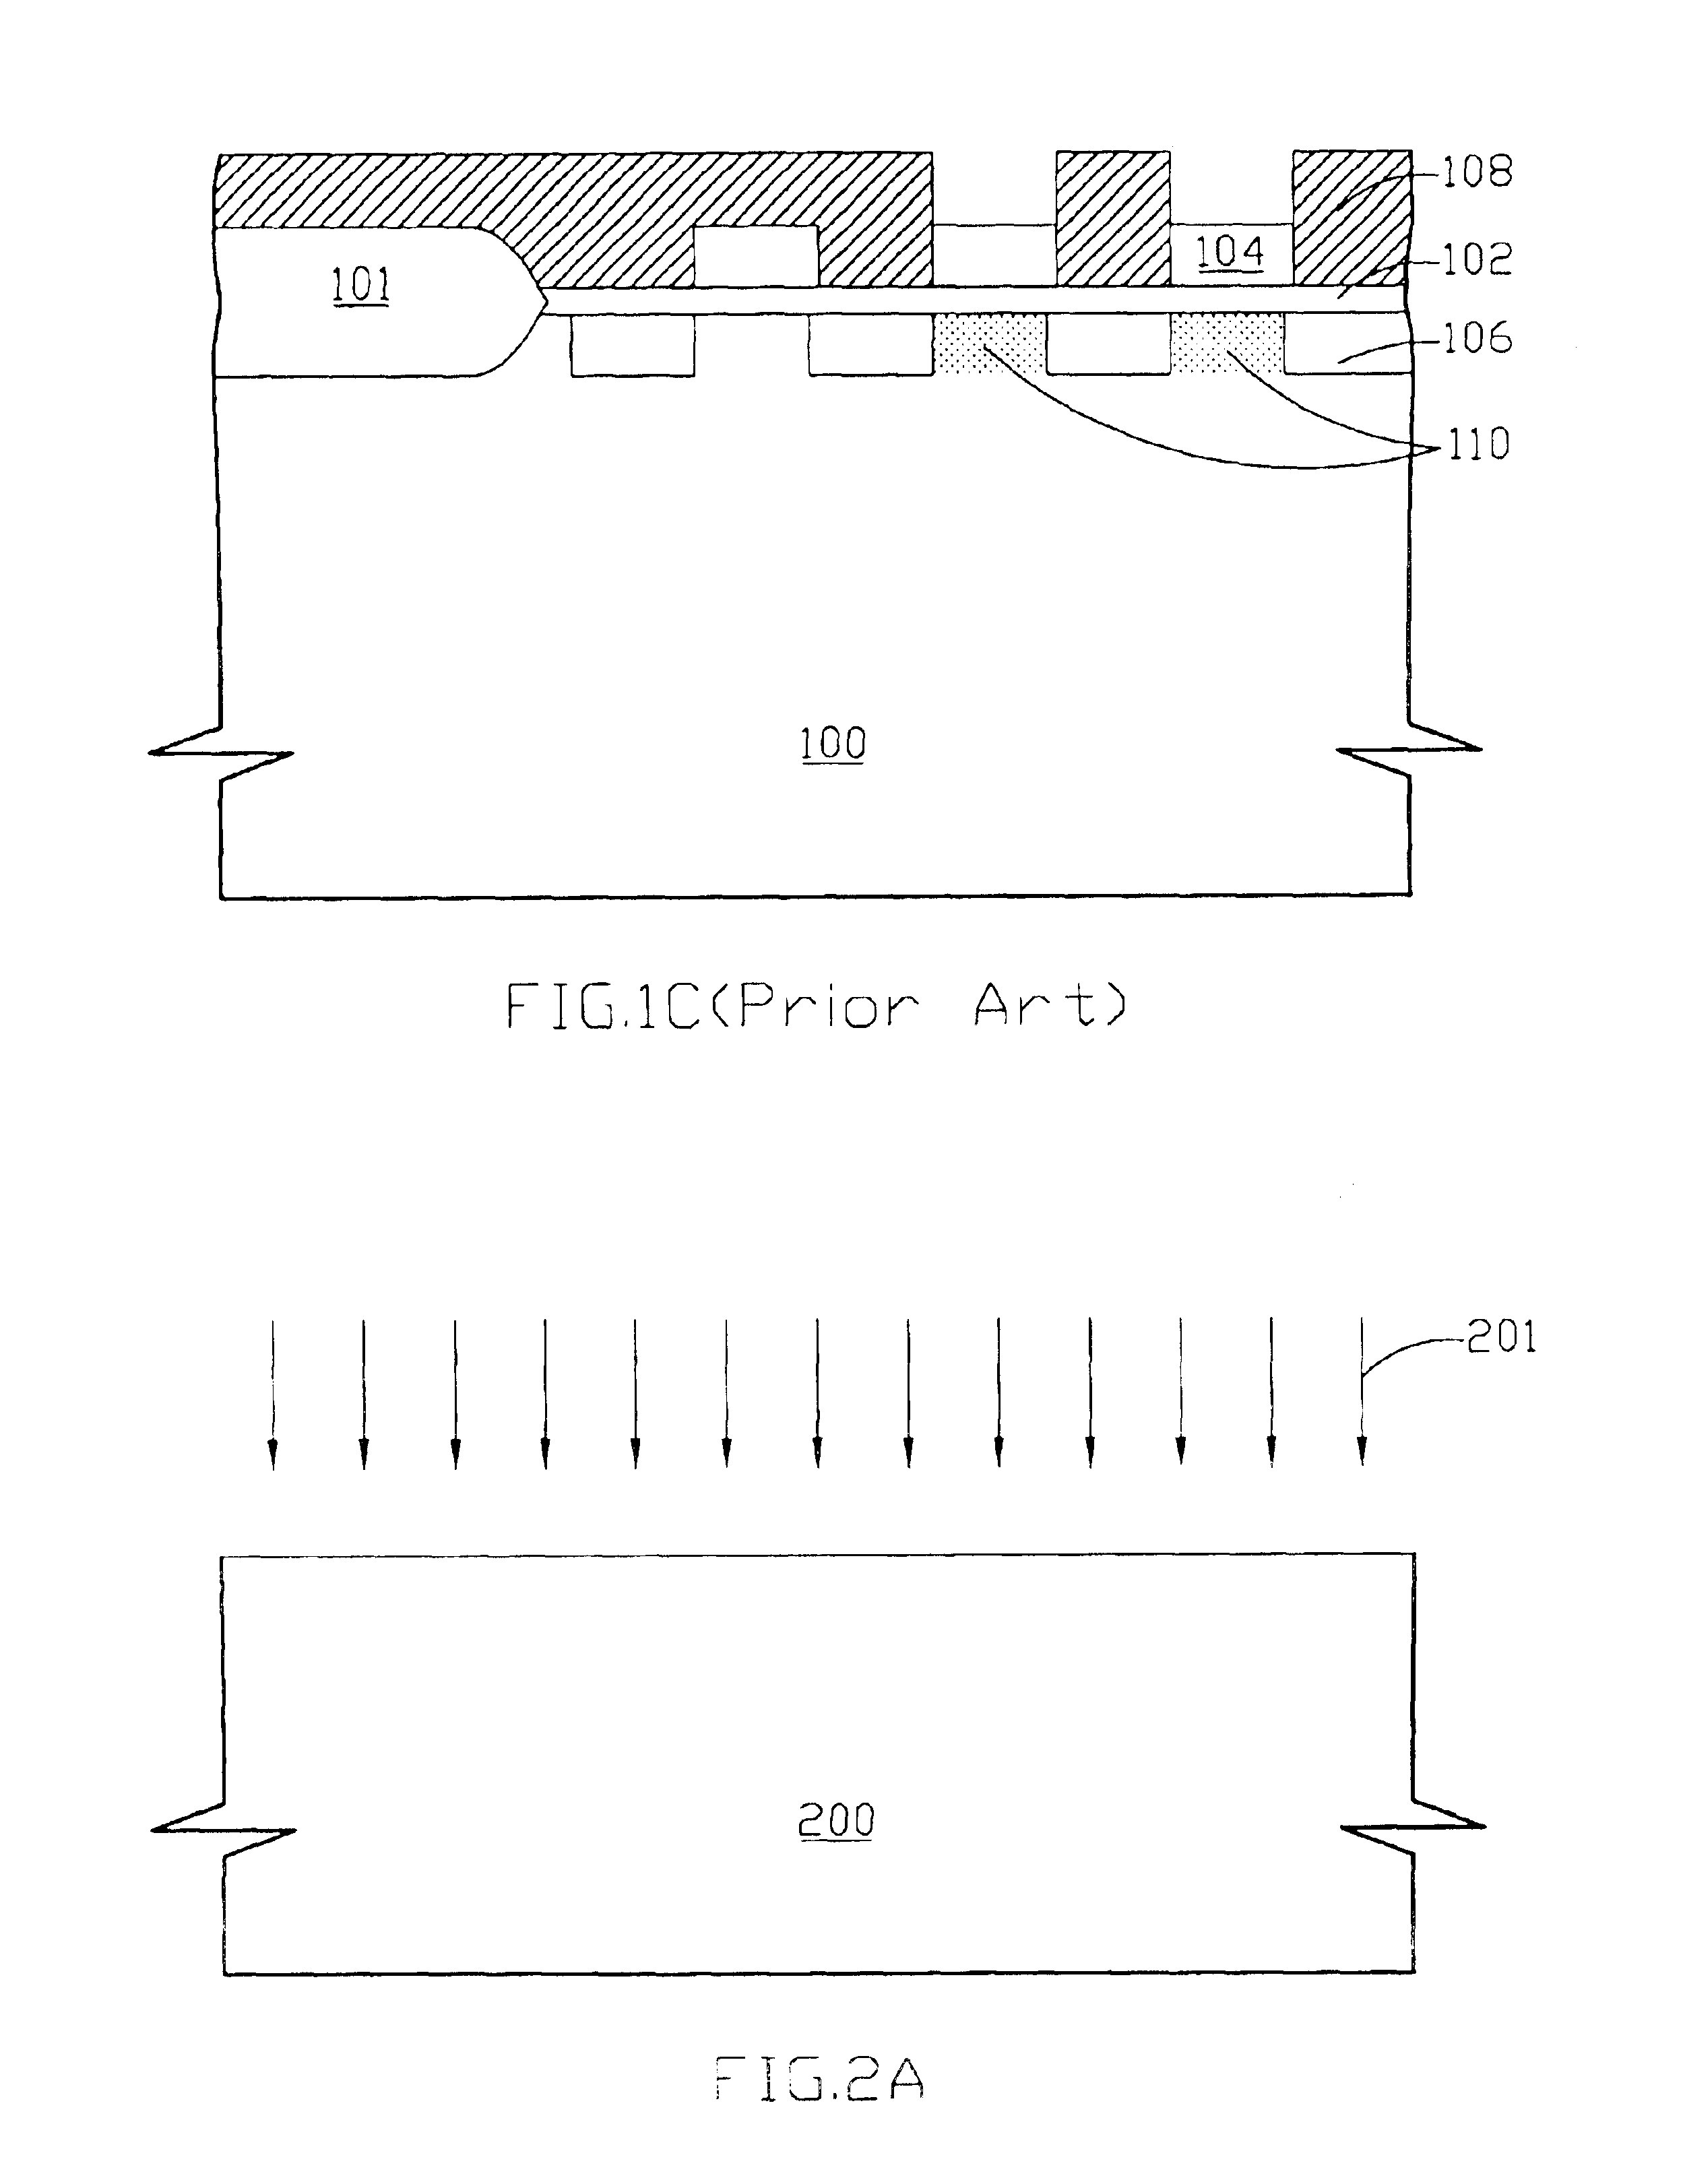 Method for fabricating a mask read-only-memory with diode cells